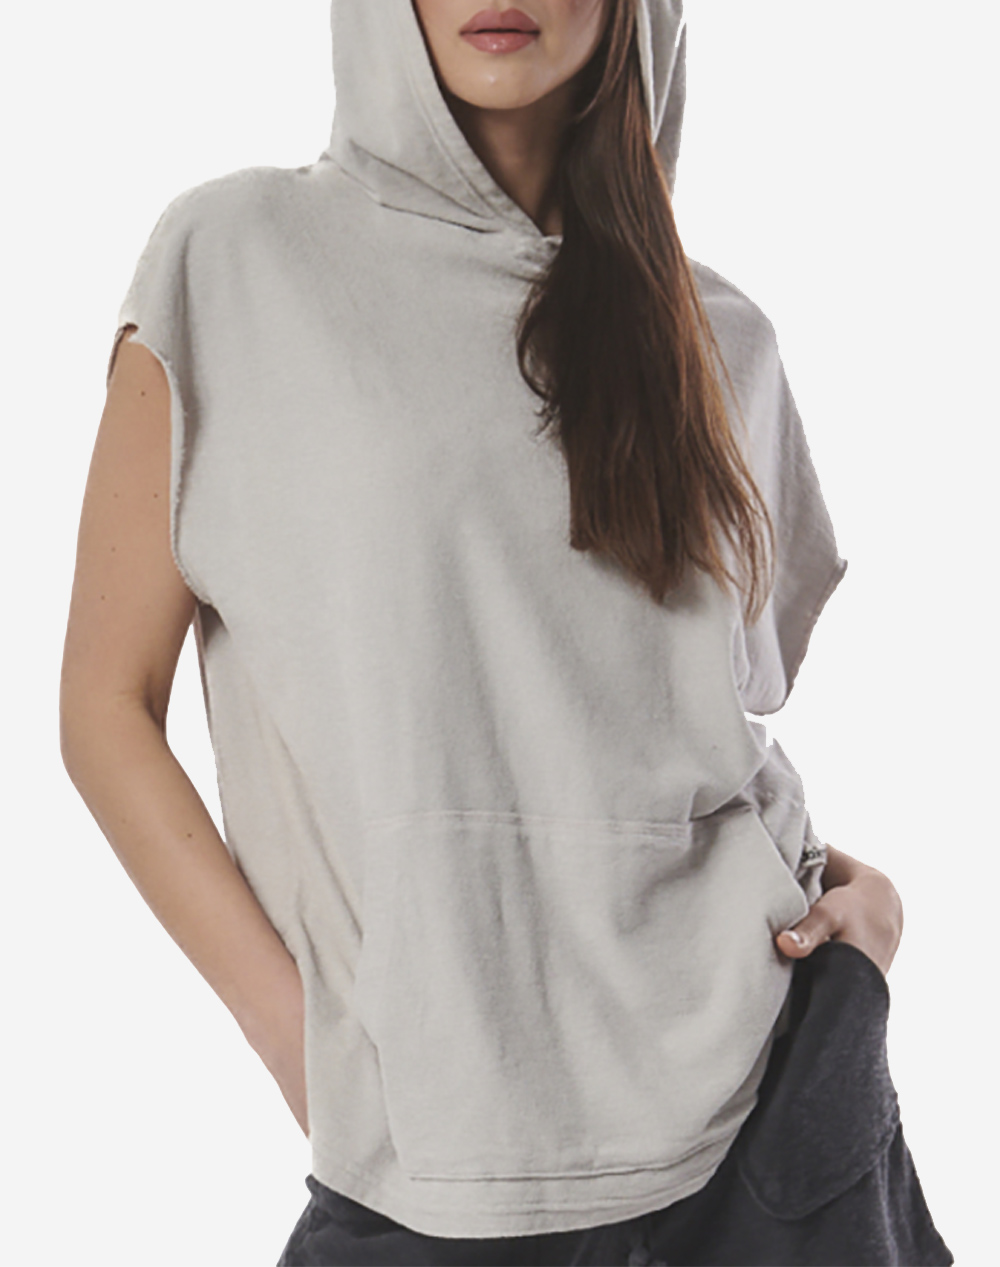 BODY ACTION GENDER NEUTRAL NATURAL DYE TERRY HOODIE 041417-01-QUIET GREY Gray 3800PBODY3400001_XR30940